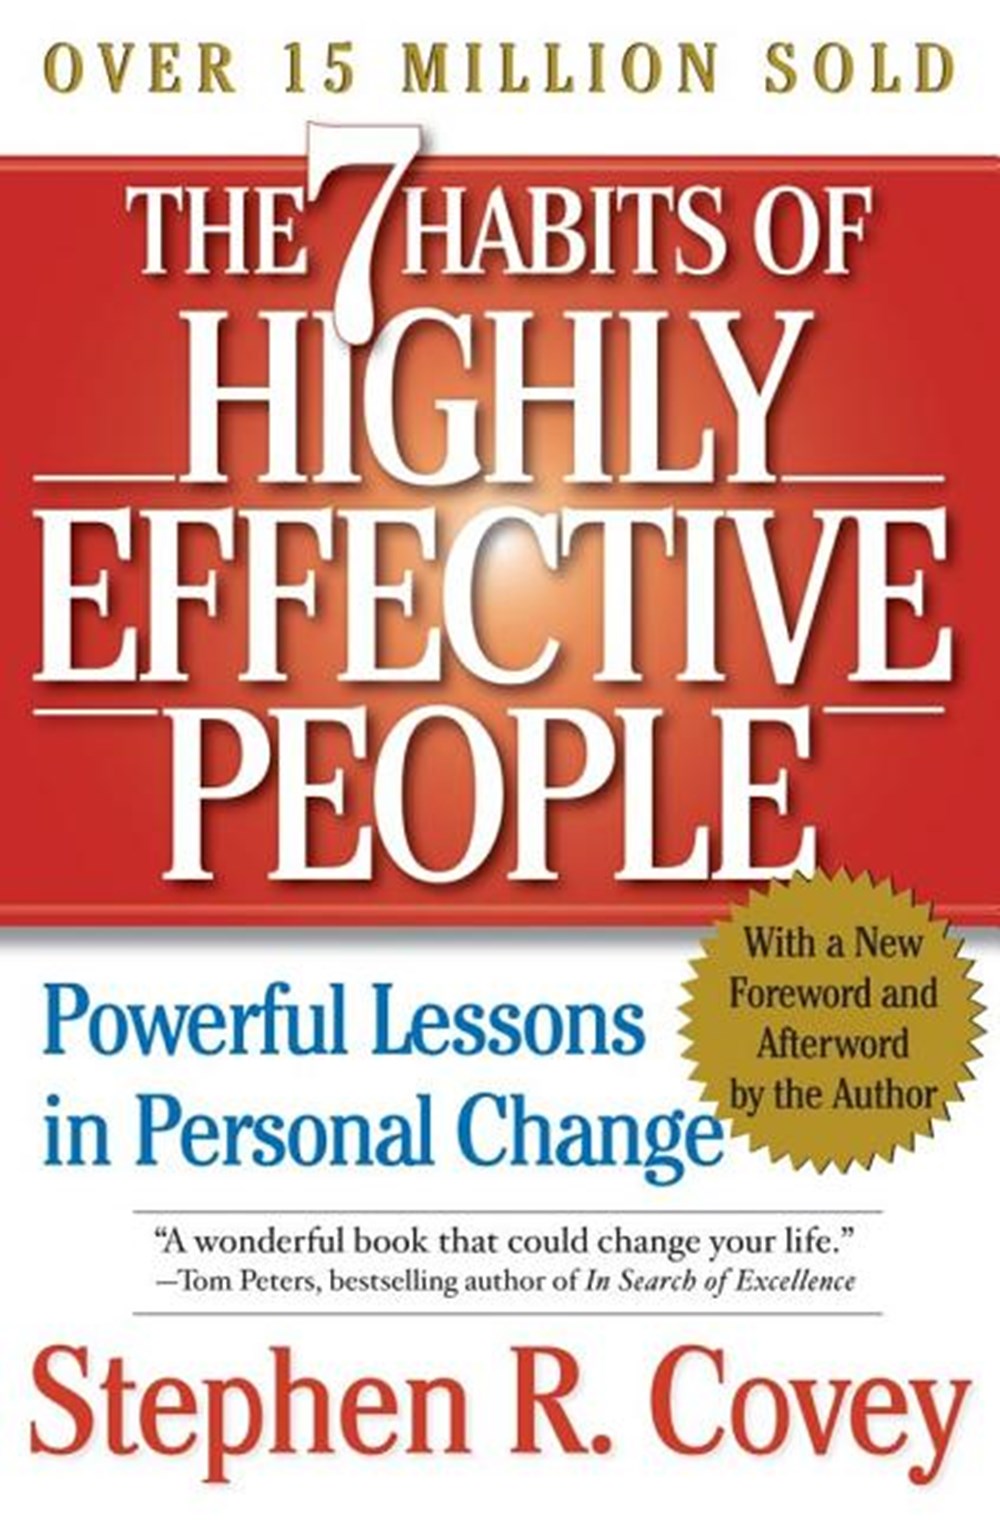 7 Habits of Highly Effective People Powerful Lessons in Personal Change (REV)